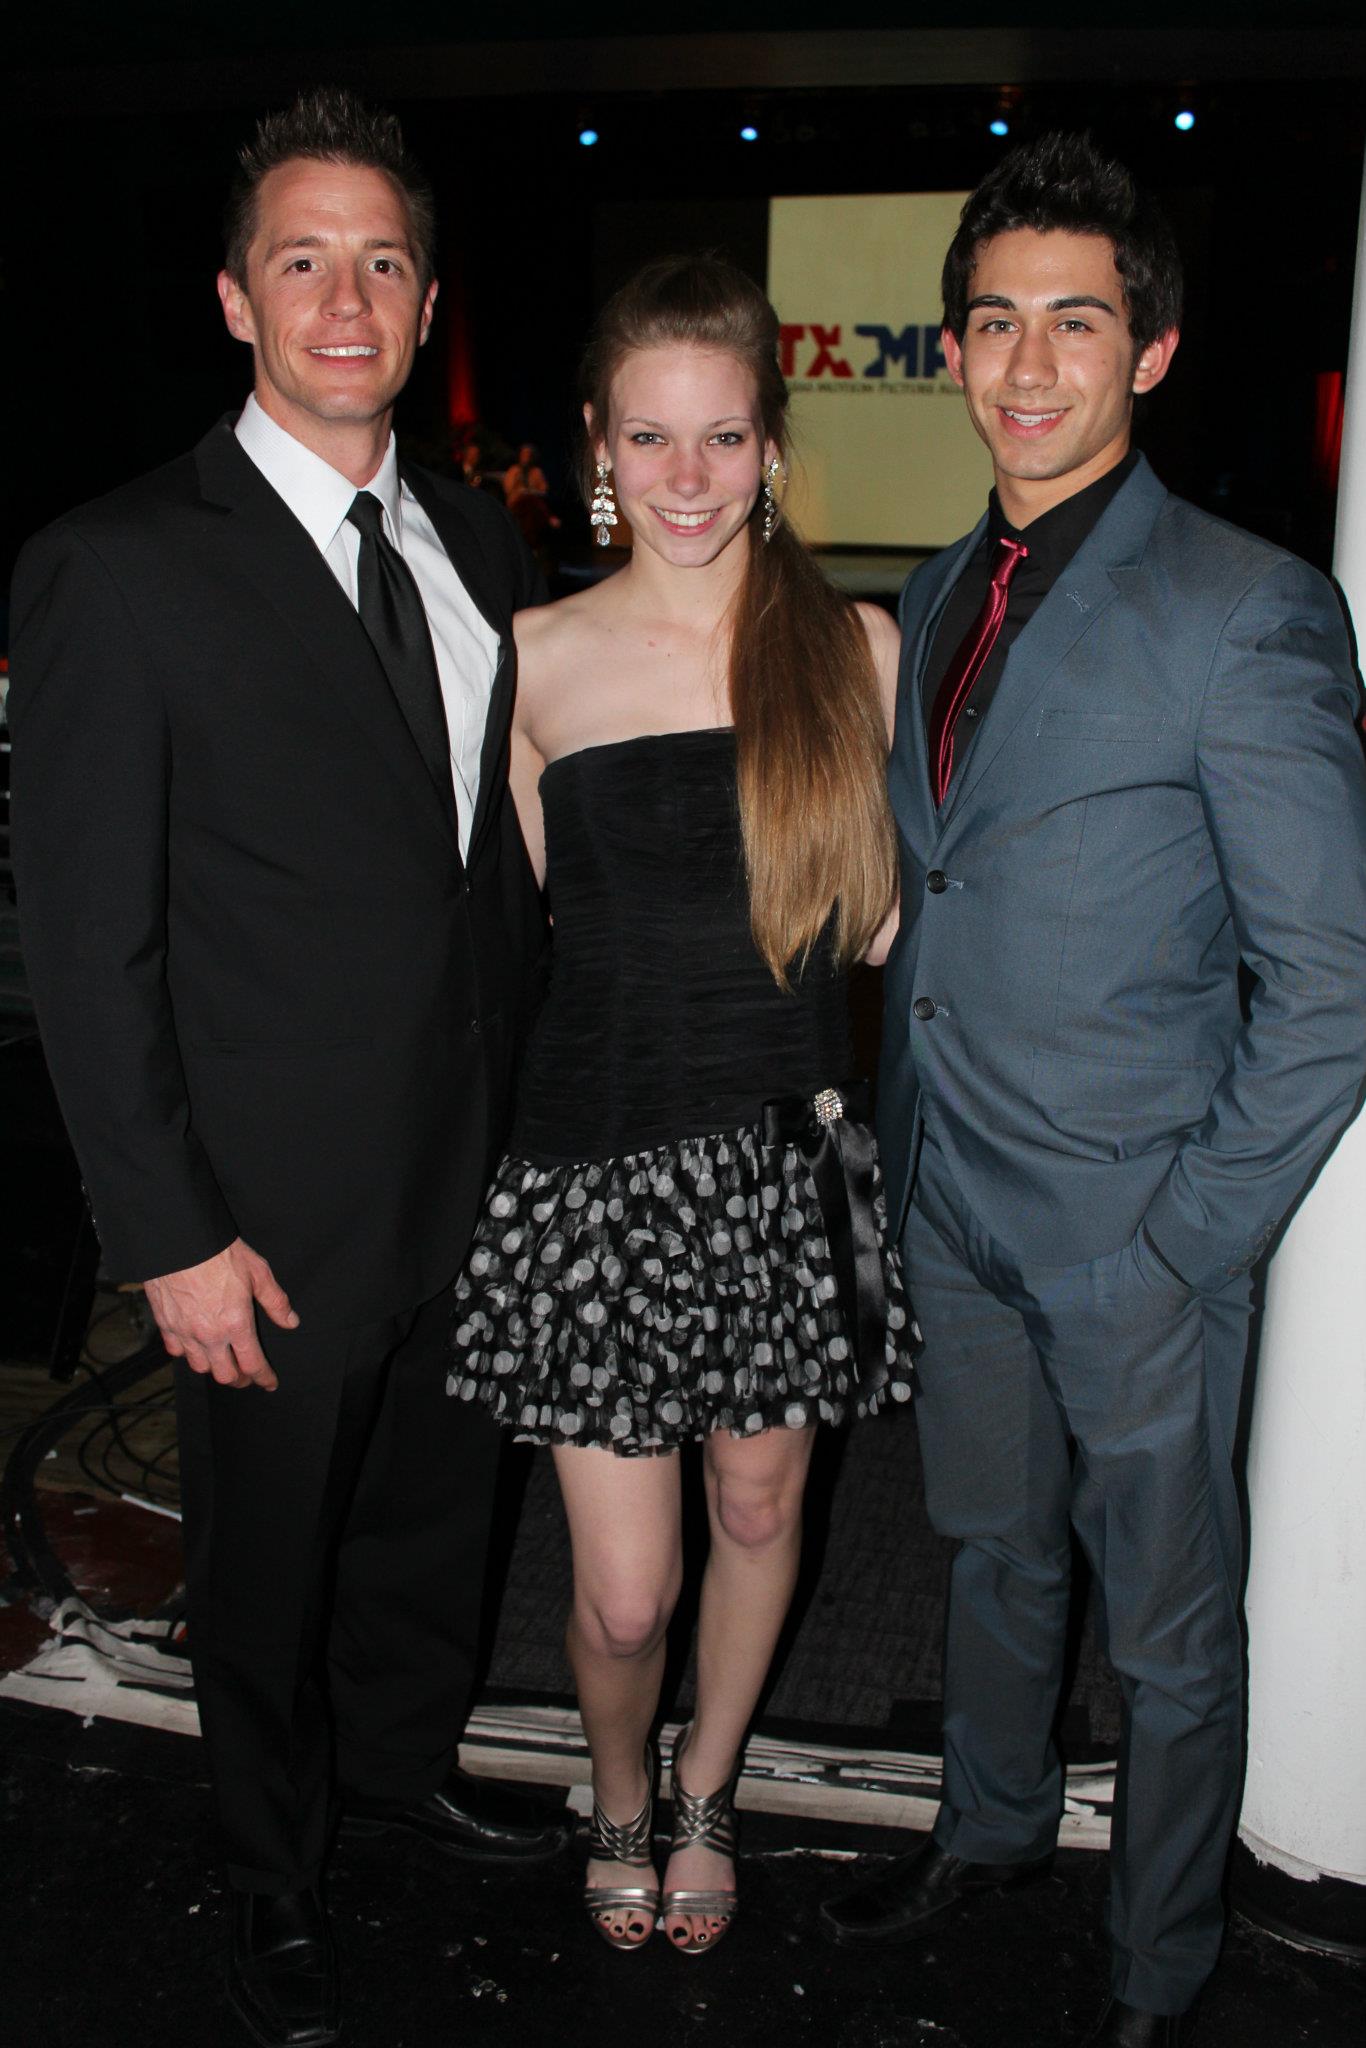 Zach Touchon, Chloe Lanier, and James DeWitt III at the SAG Awards party in Dallas,Tx.